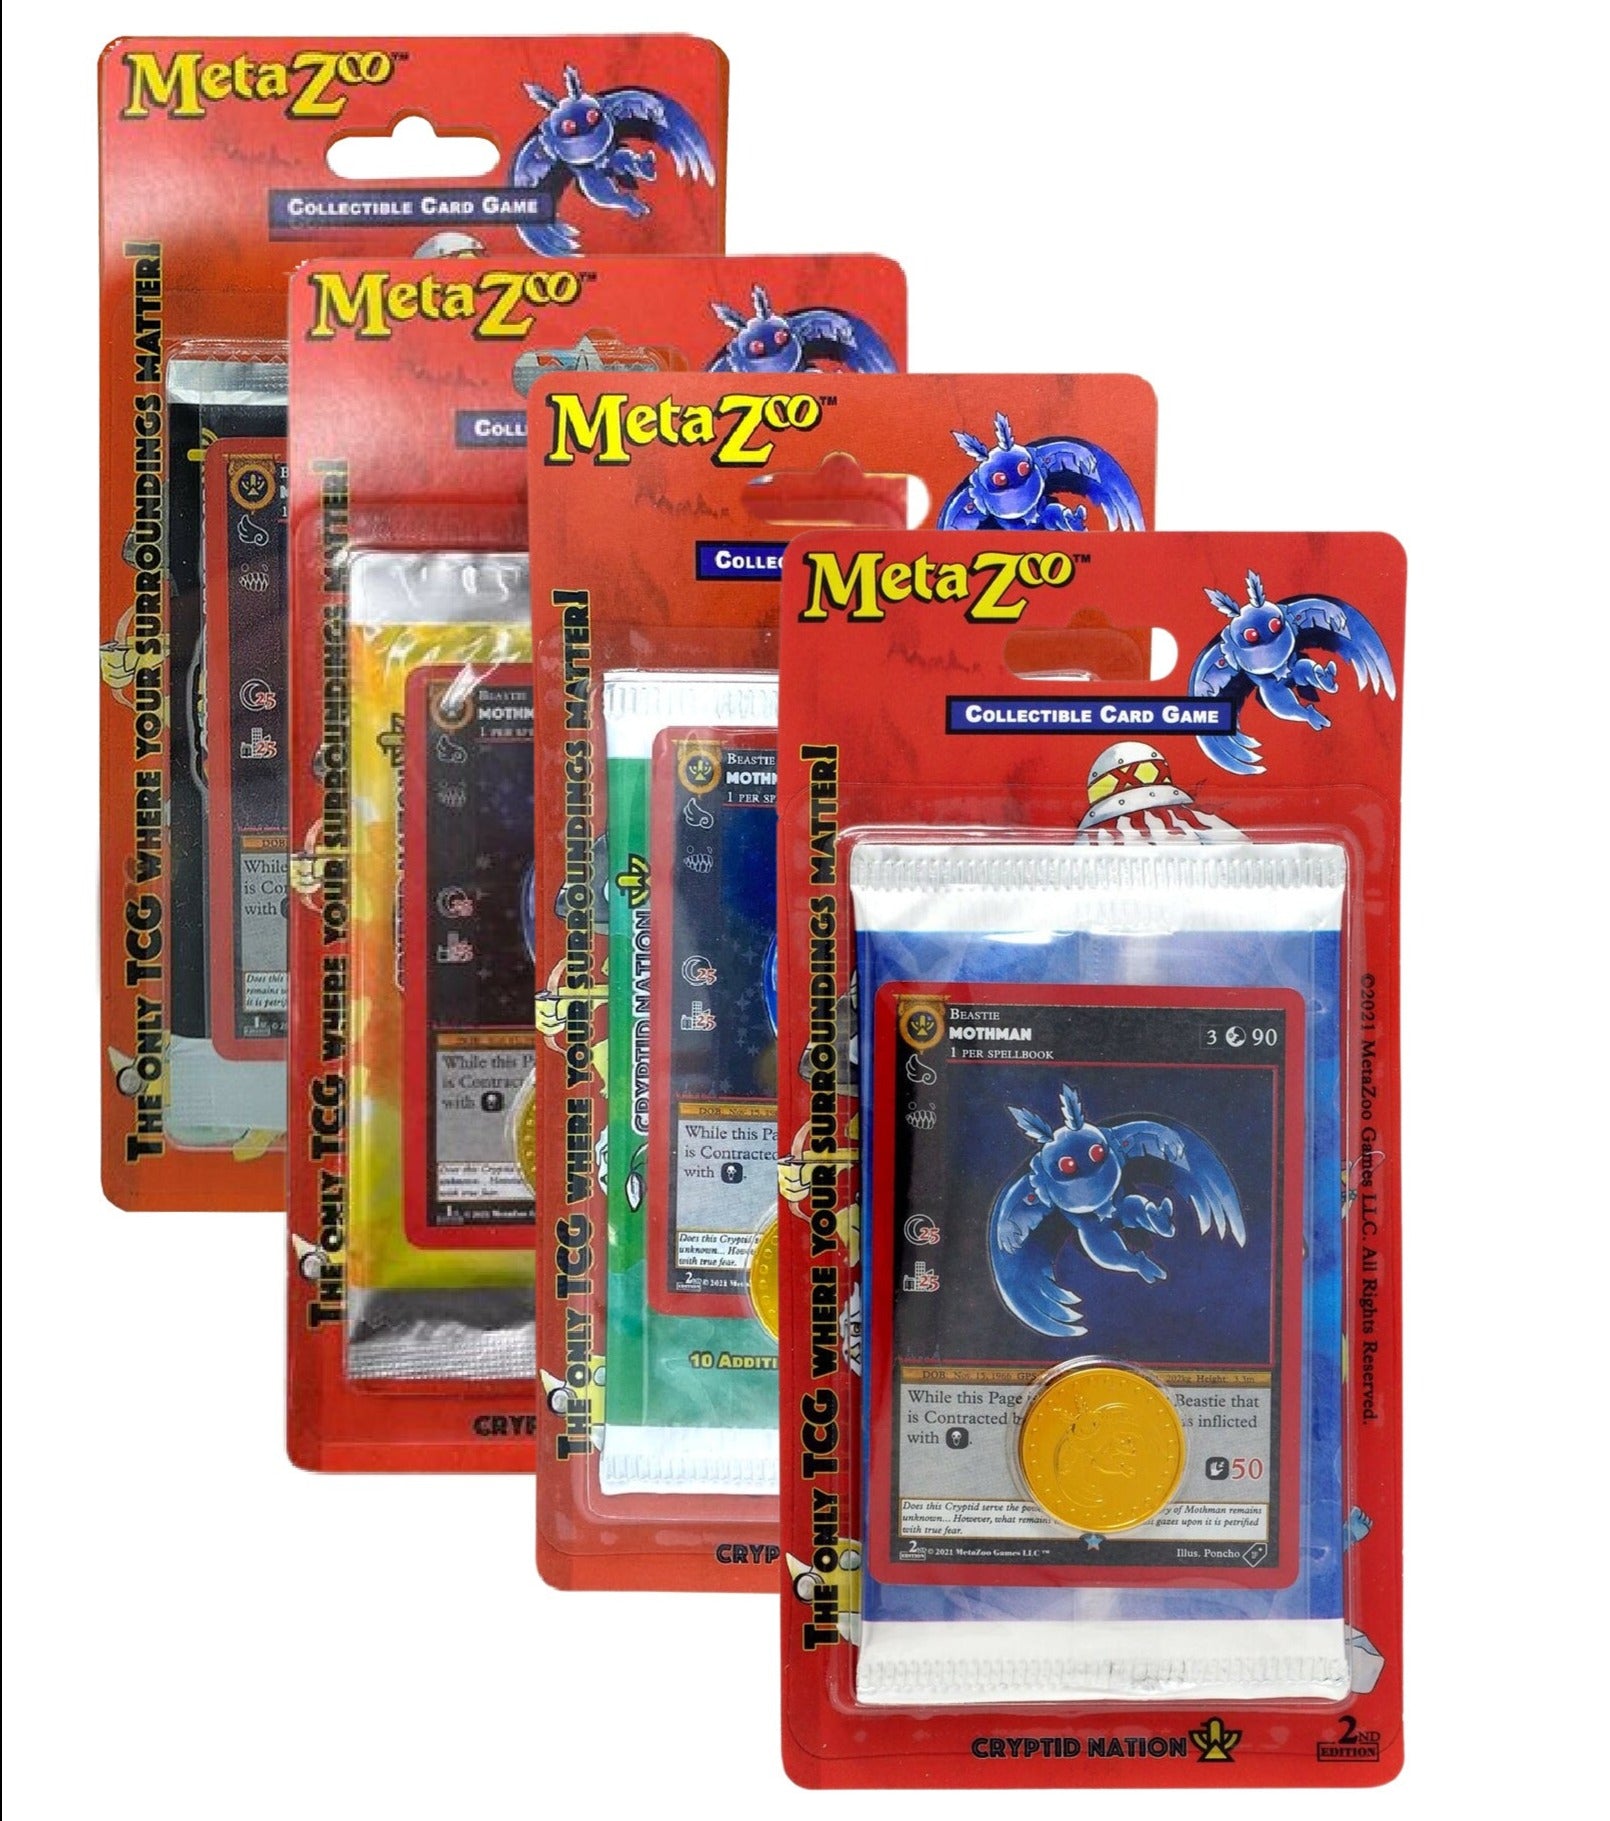 MetaZoo Cryptid Nation 2nd Edition - Blister Pack